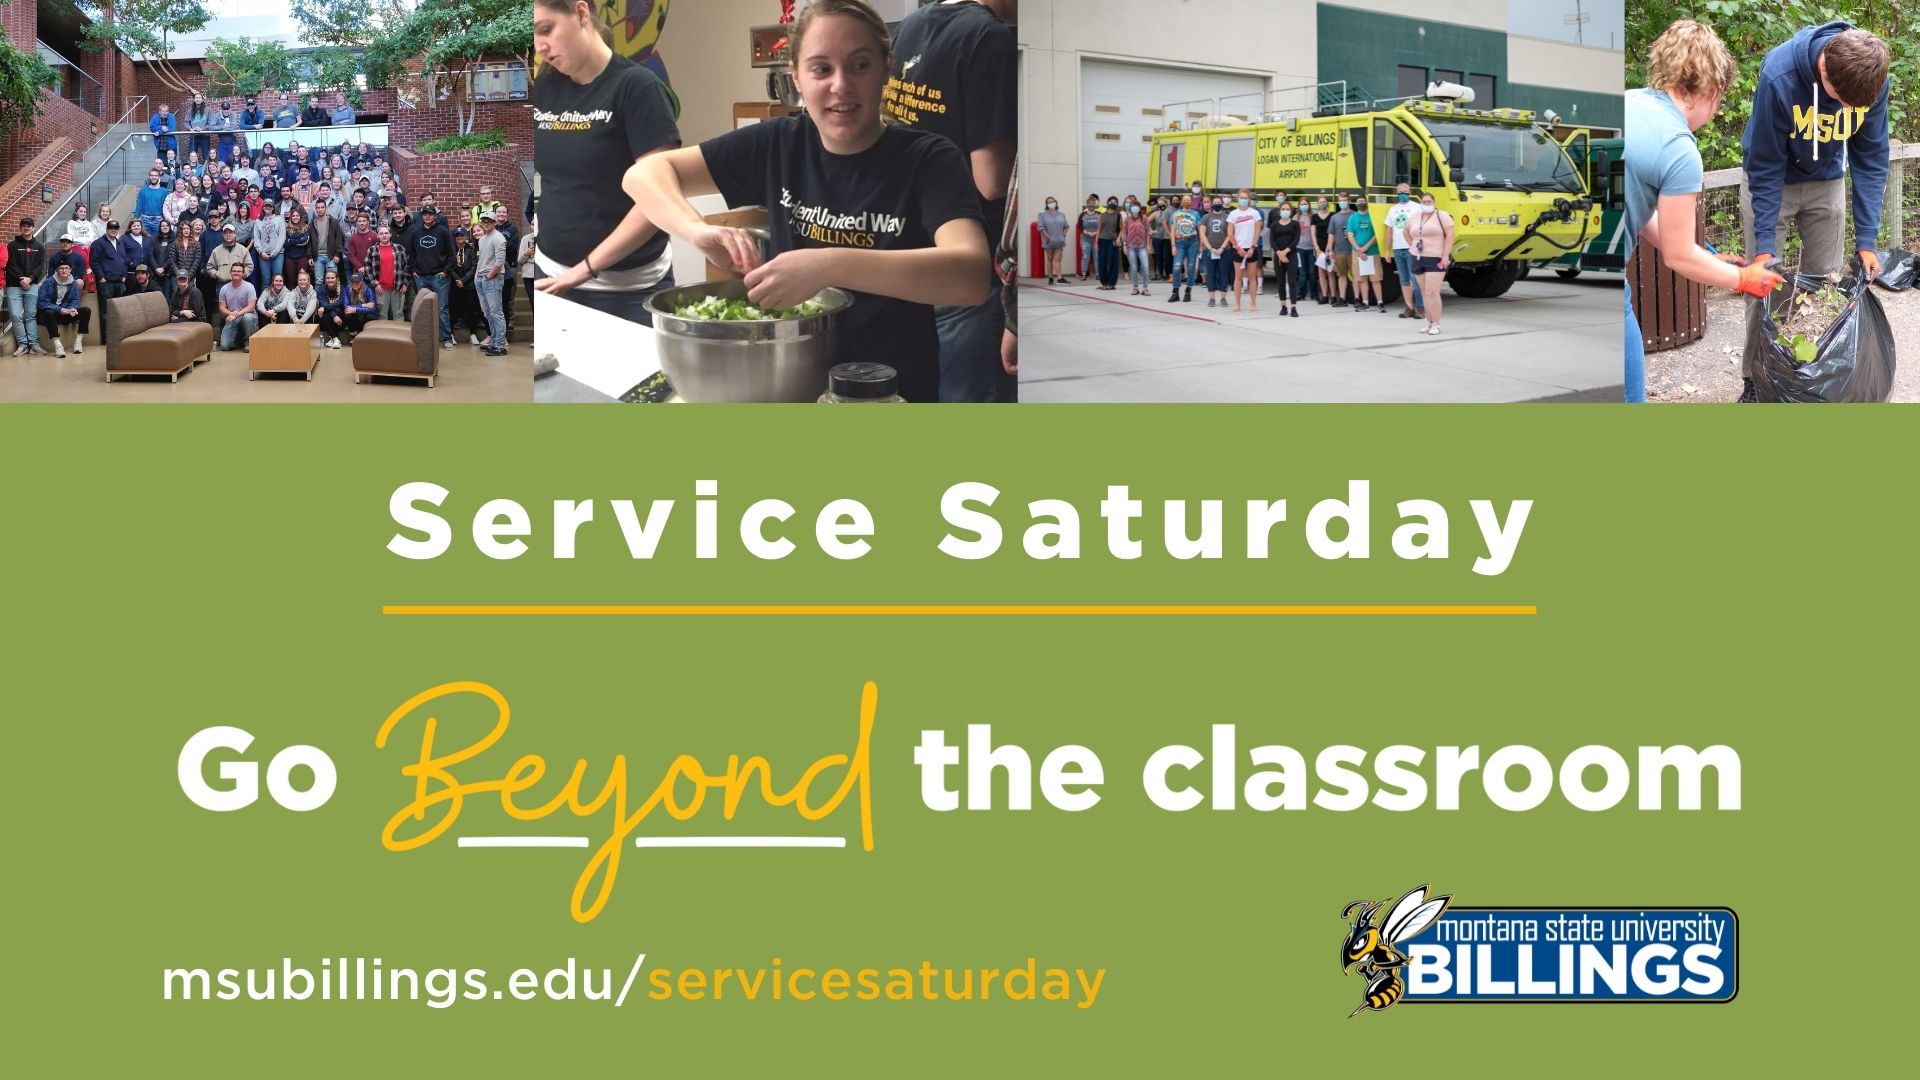 Service Saturday. Go beyond the classroom.